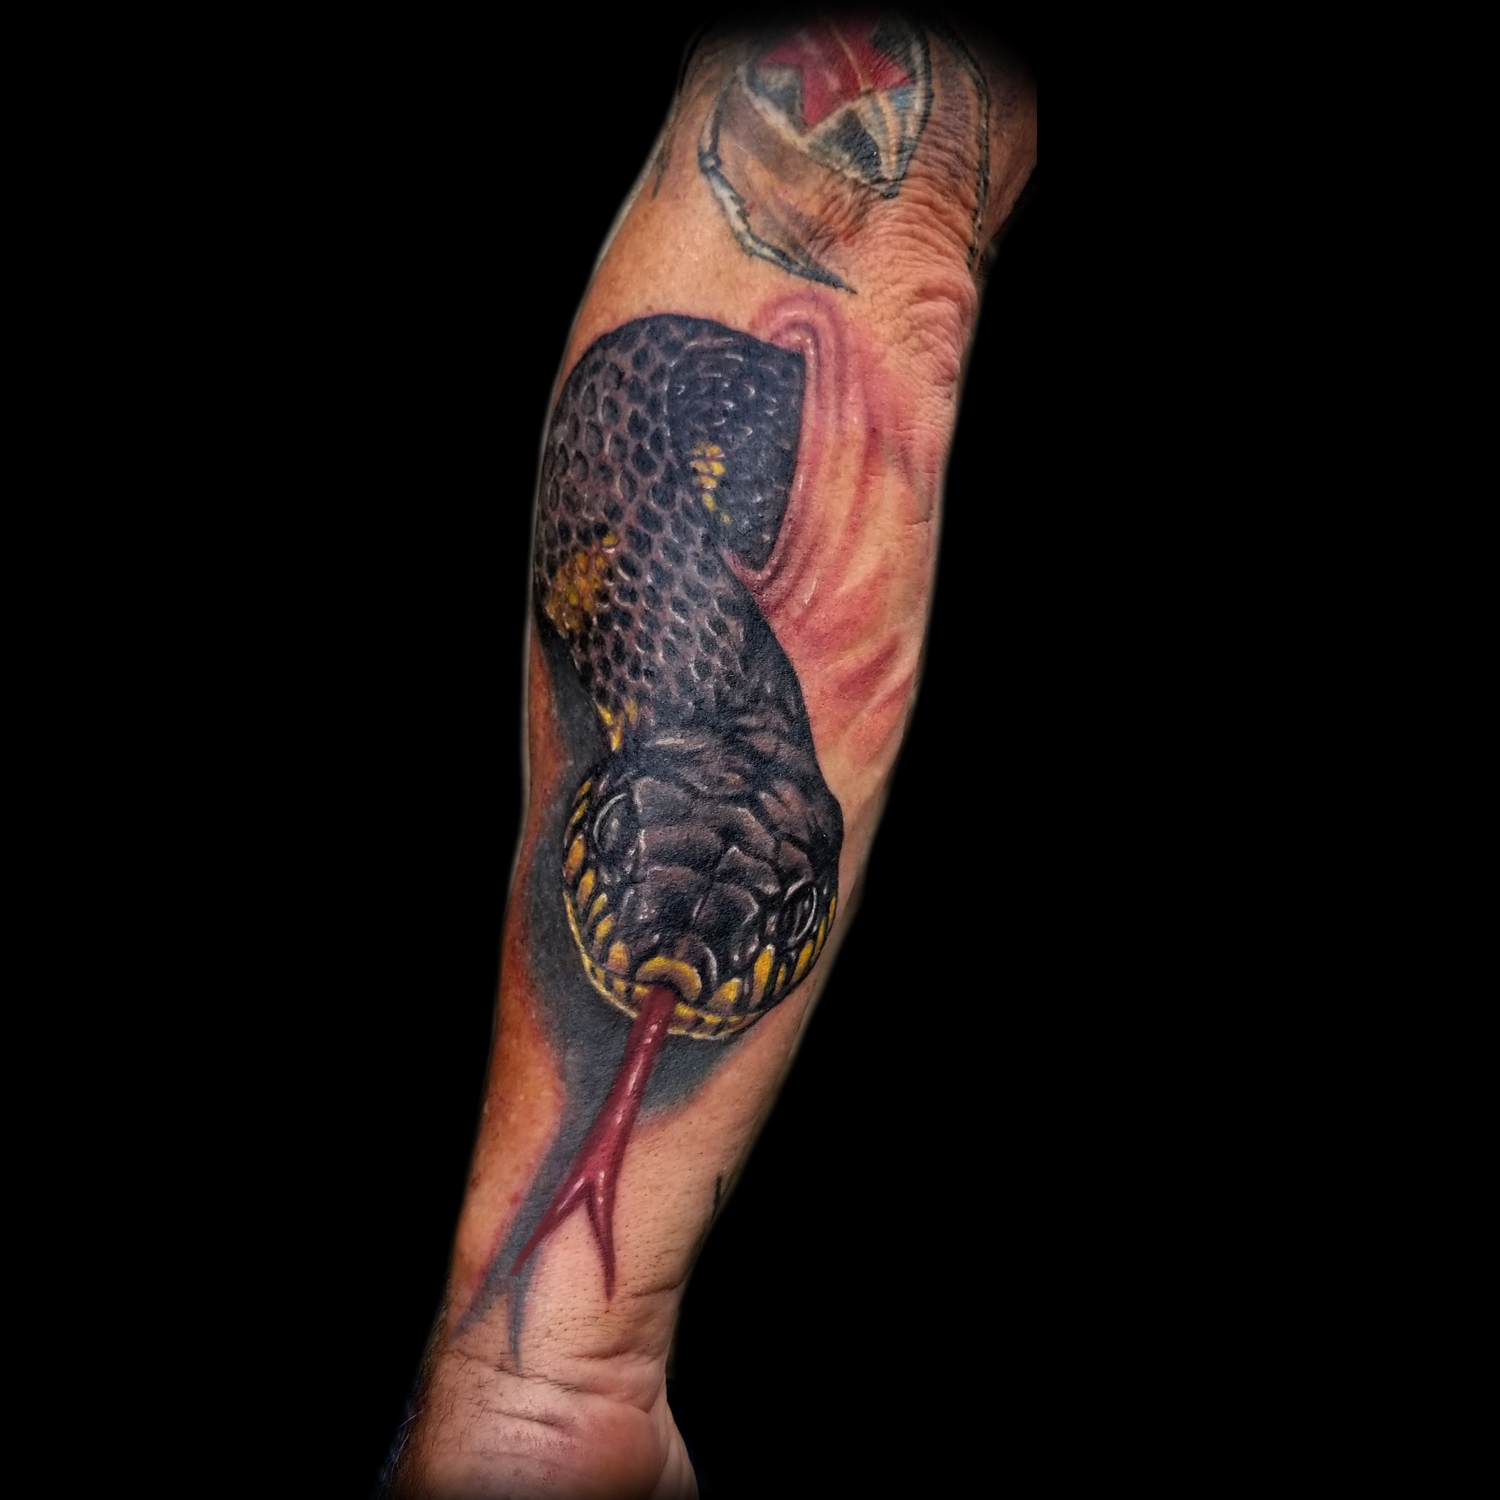 Realistic 3d Snake Tattoo Done In San Francisco At Masterpiece Tattoo